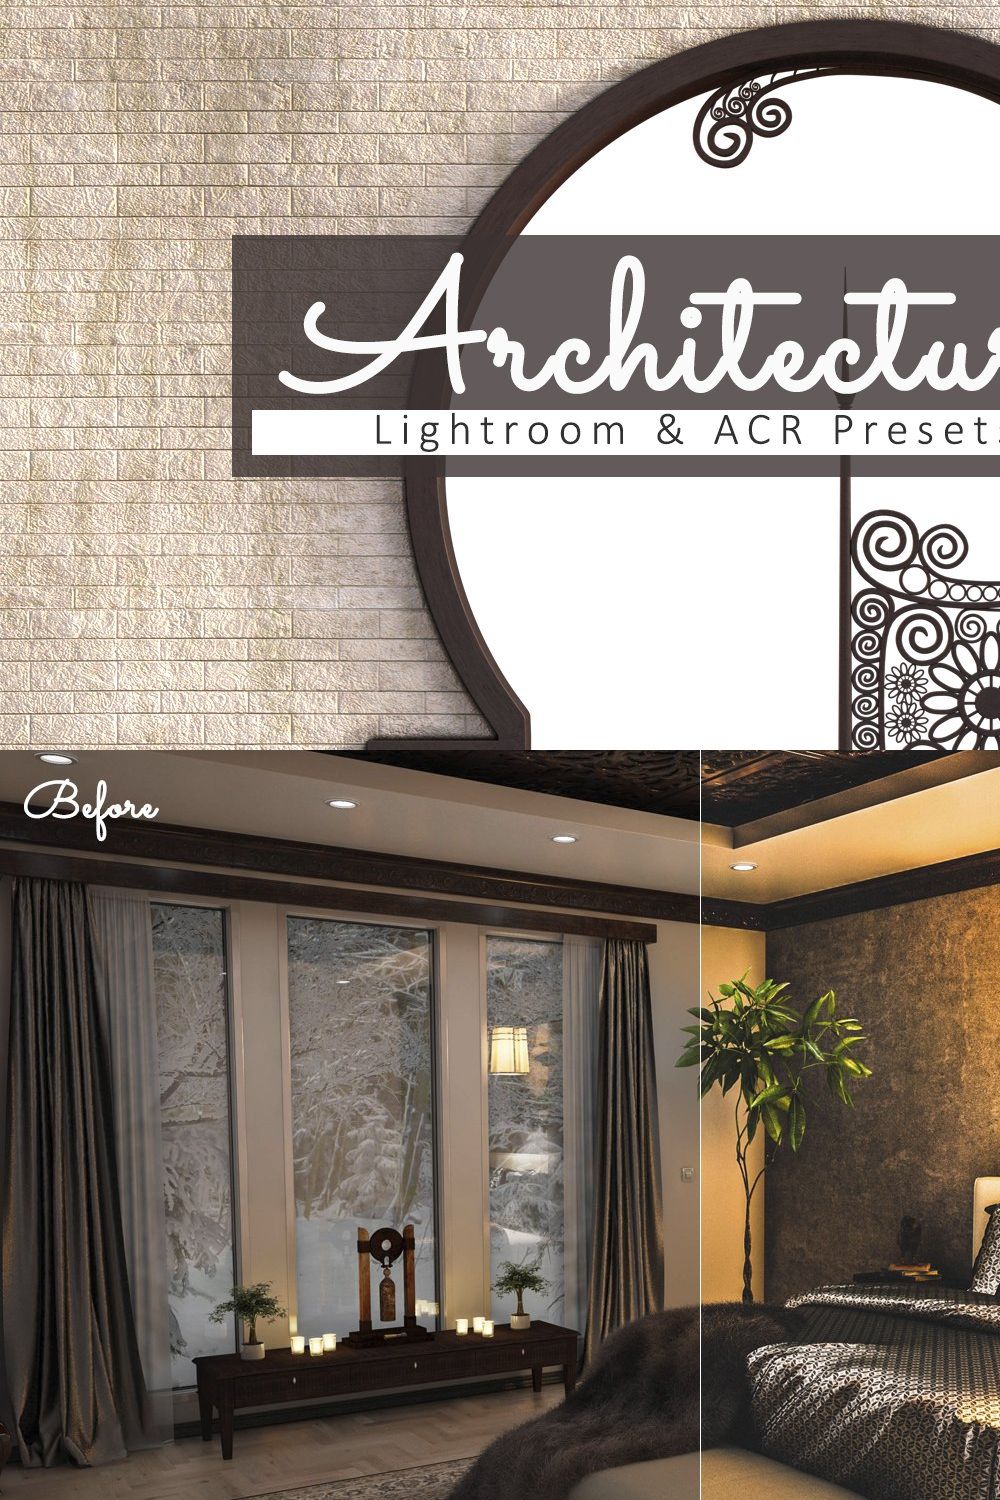 Architure Lr and ACR Presets pinterest preview image.